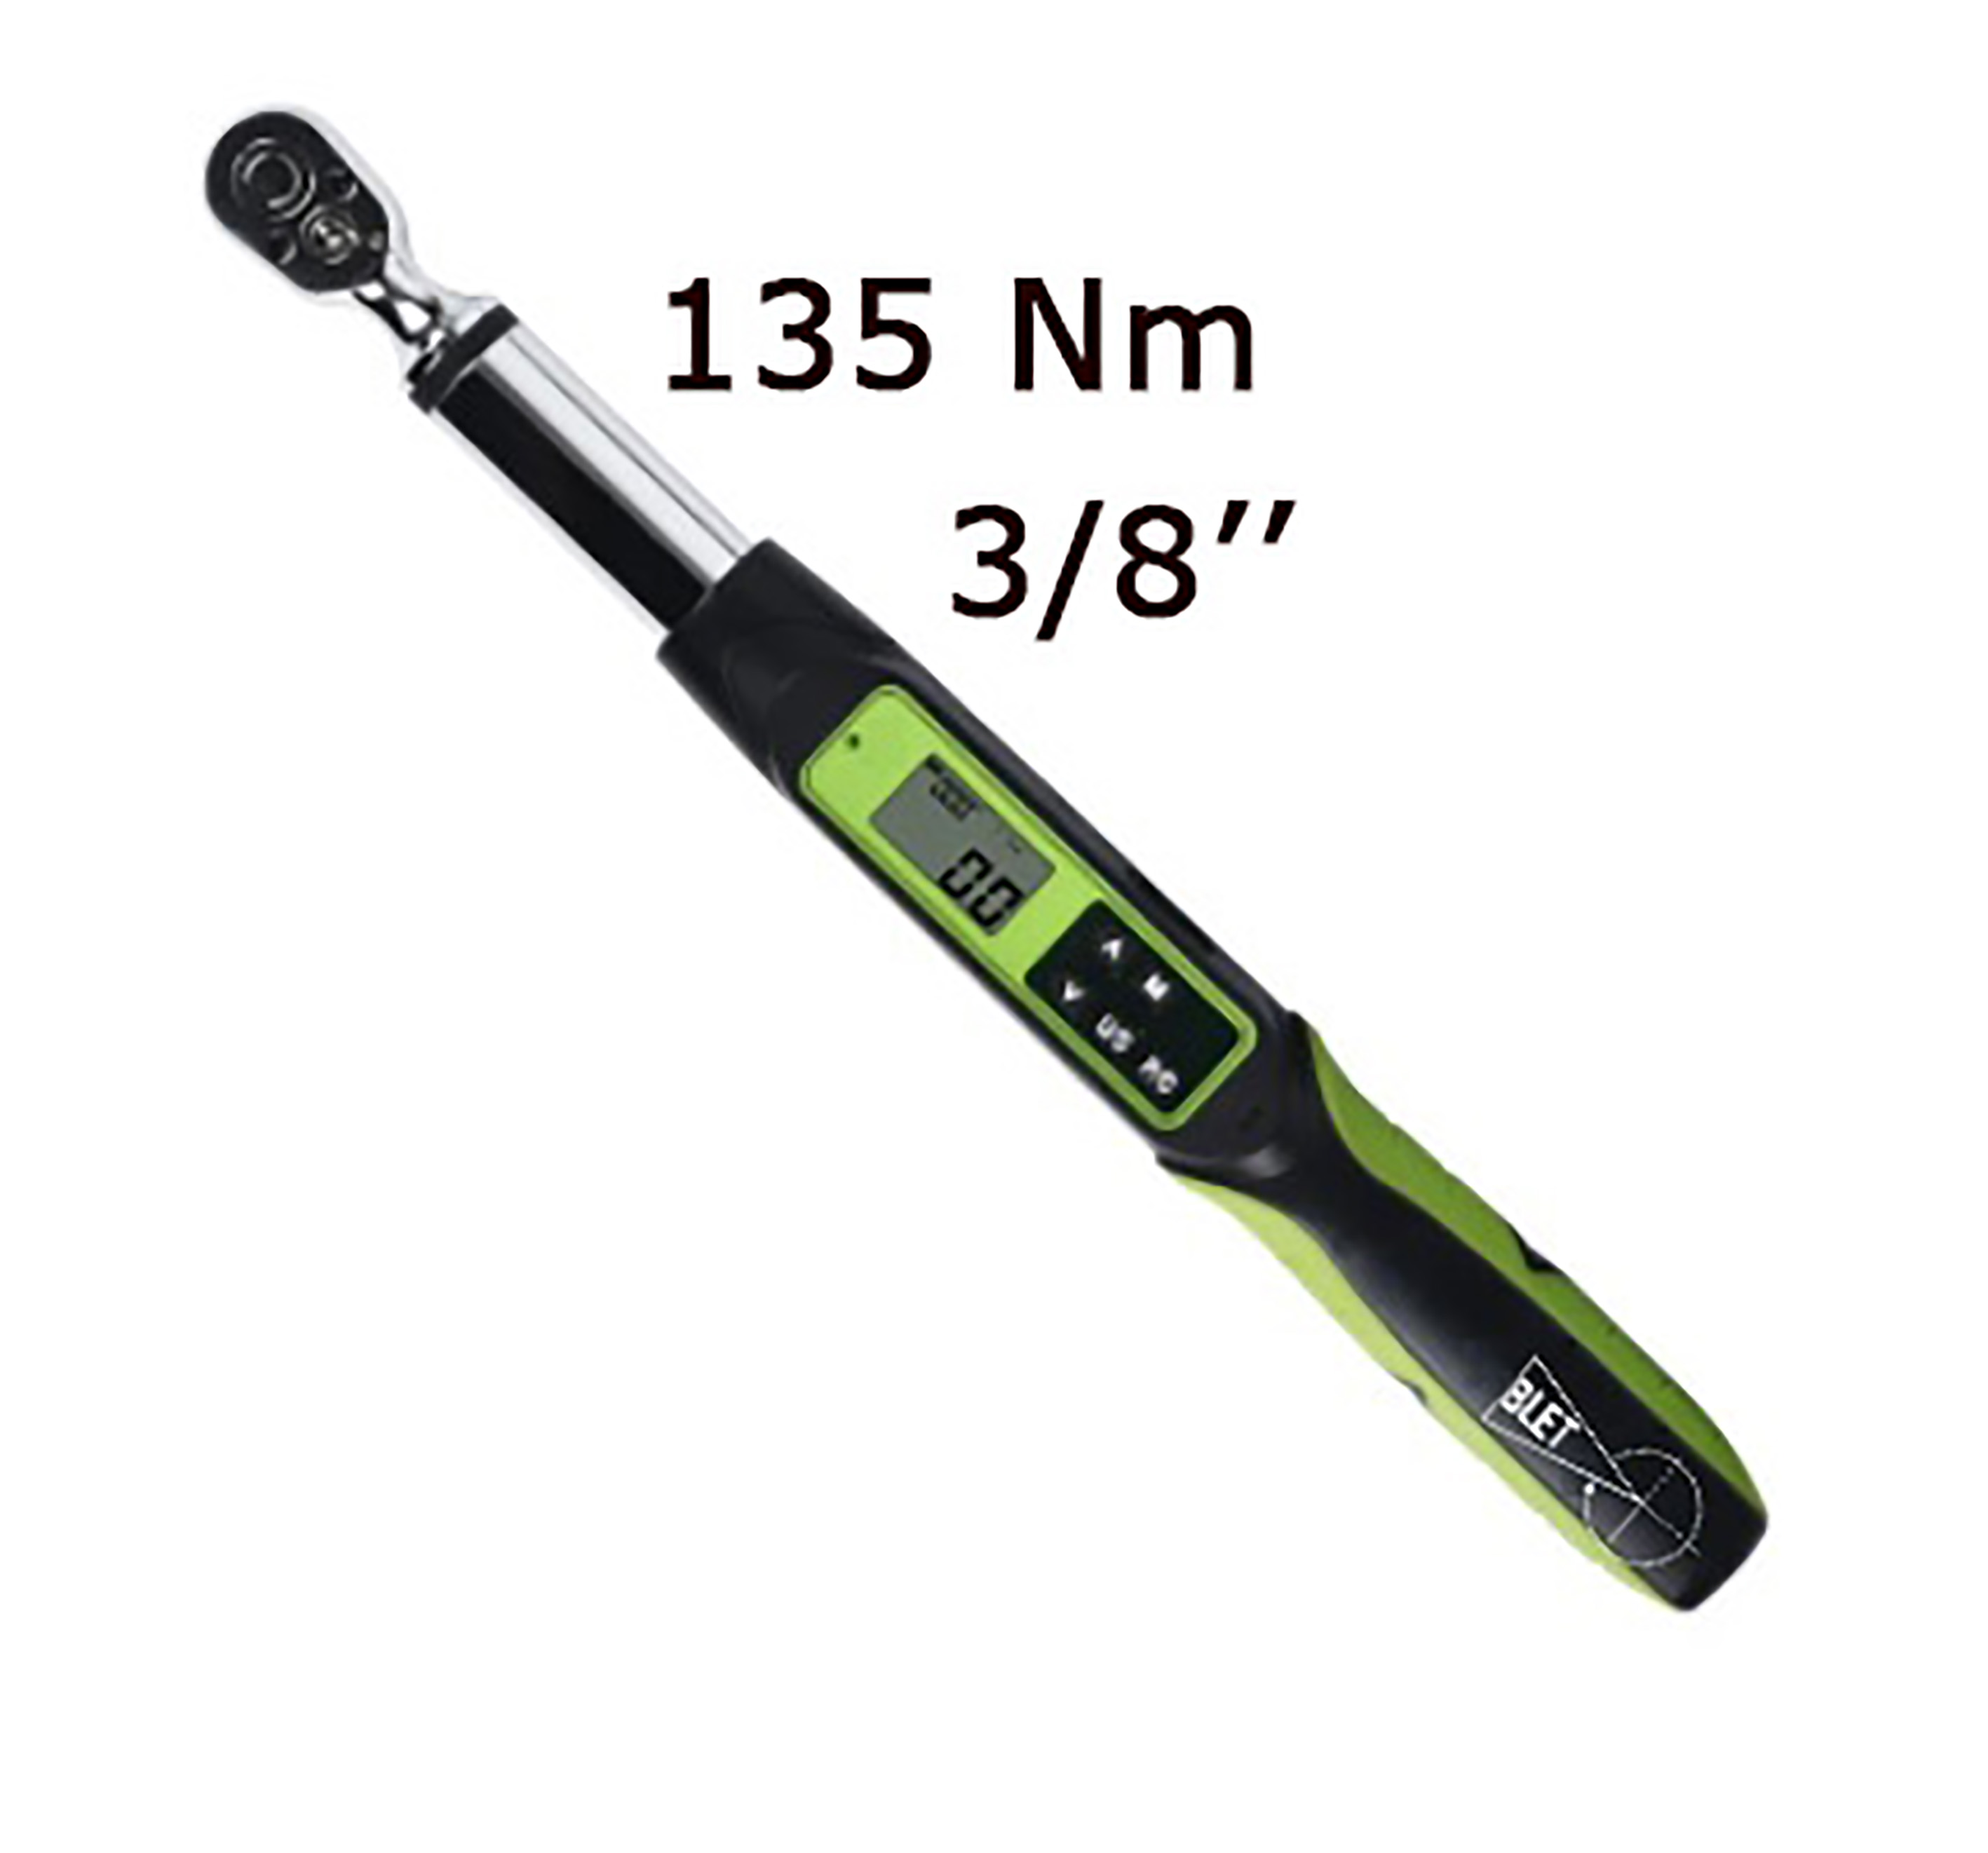 DIGITAL TORQUE ANGLE WRENCH WITH COMMUNICATION 135 Nm READING 0,1 Nm SIZE 3/8" BLET<br>Ref : CLET5-CDB13538